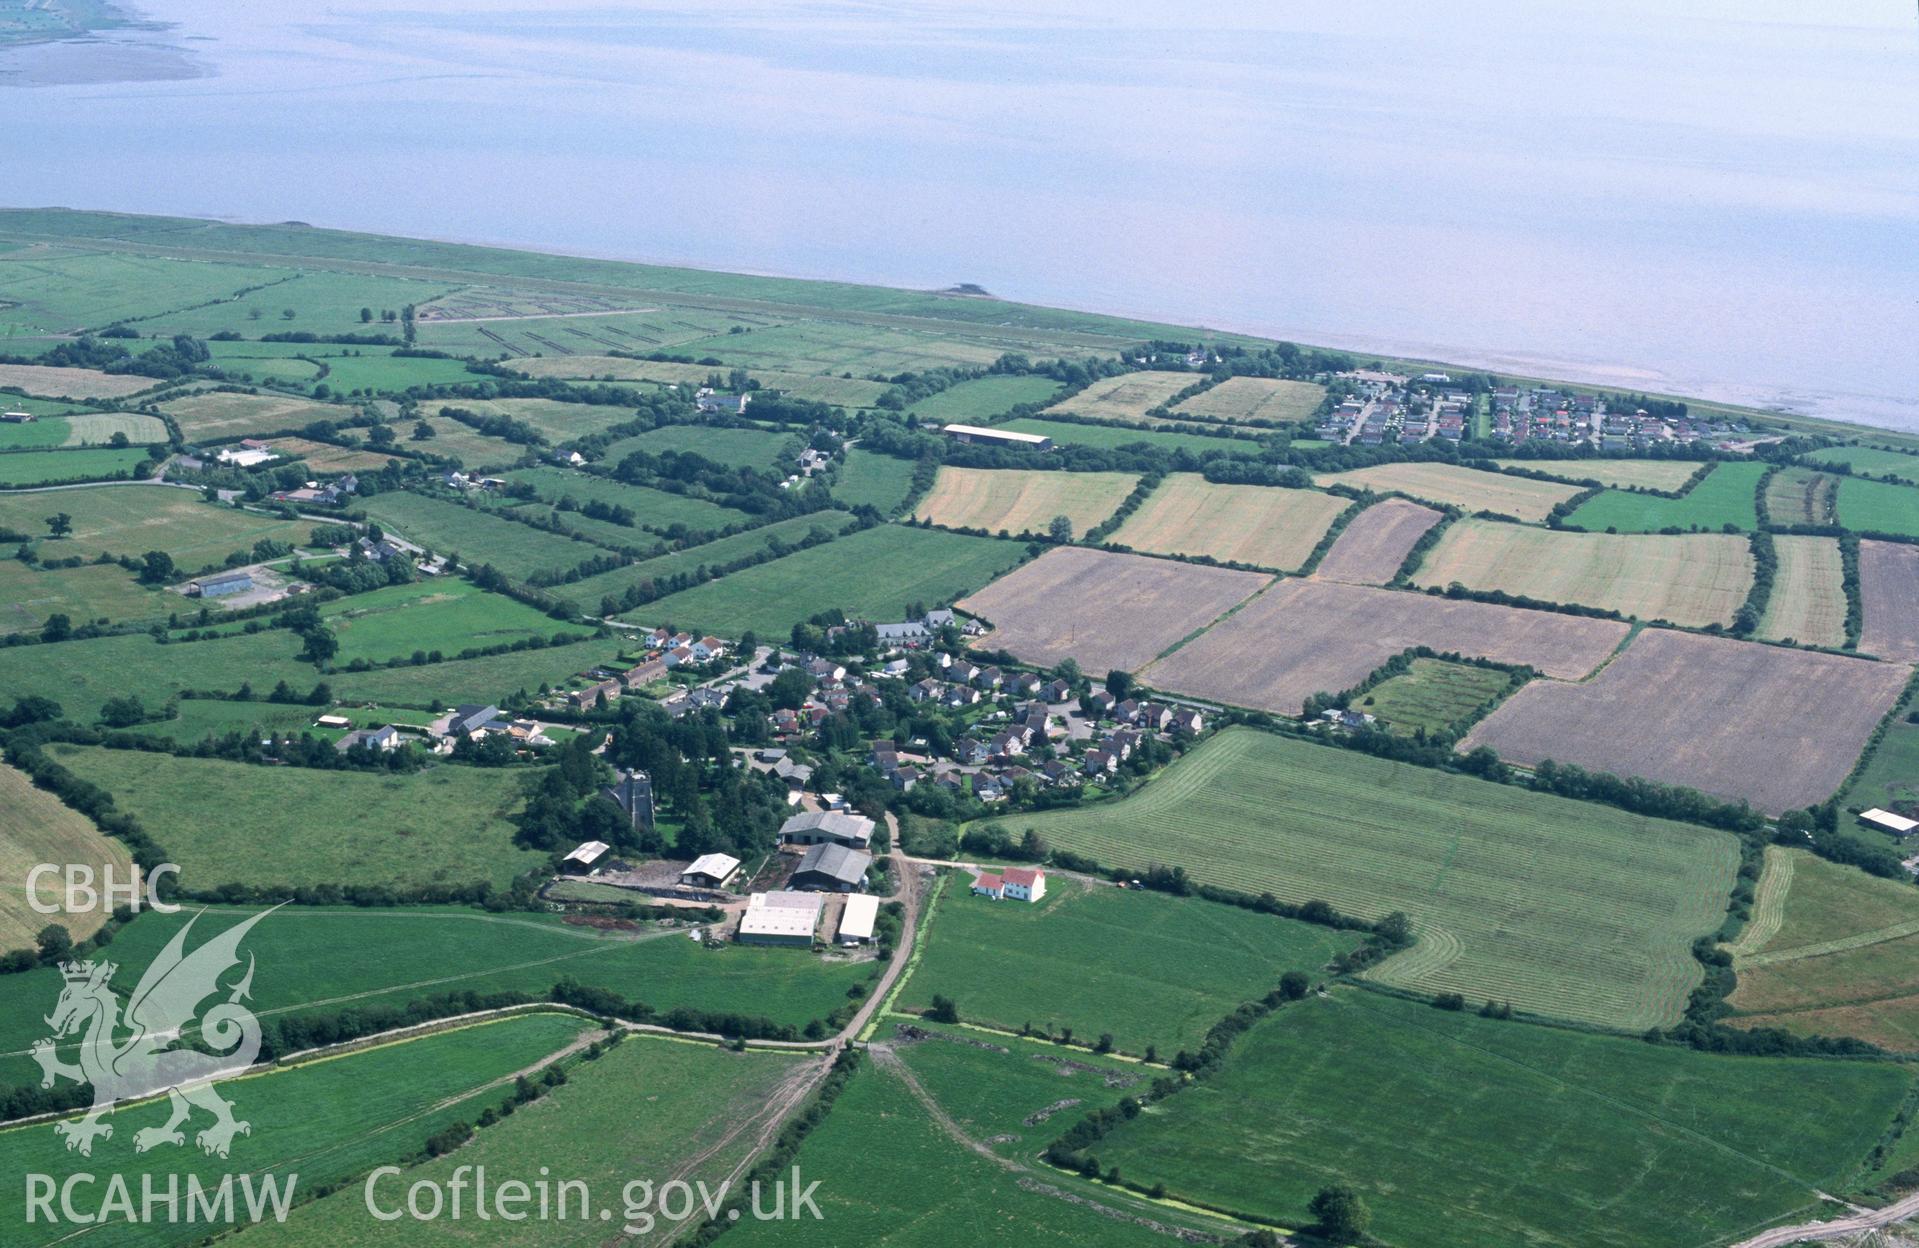 Slide of RCAHMW colour oblique aerial photograph of St Brides Wentlooge, taken by T.G. Driver, 25/7/2001.